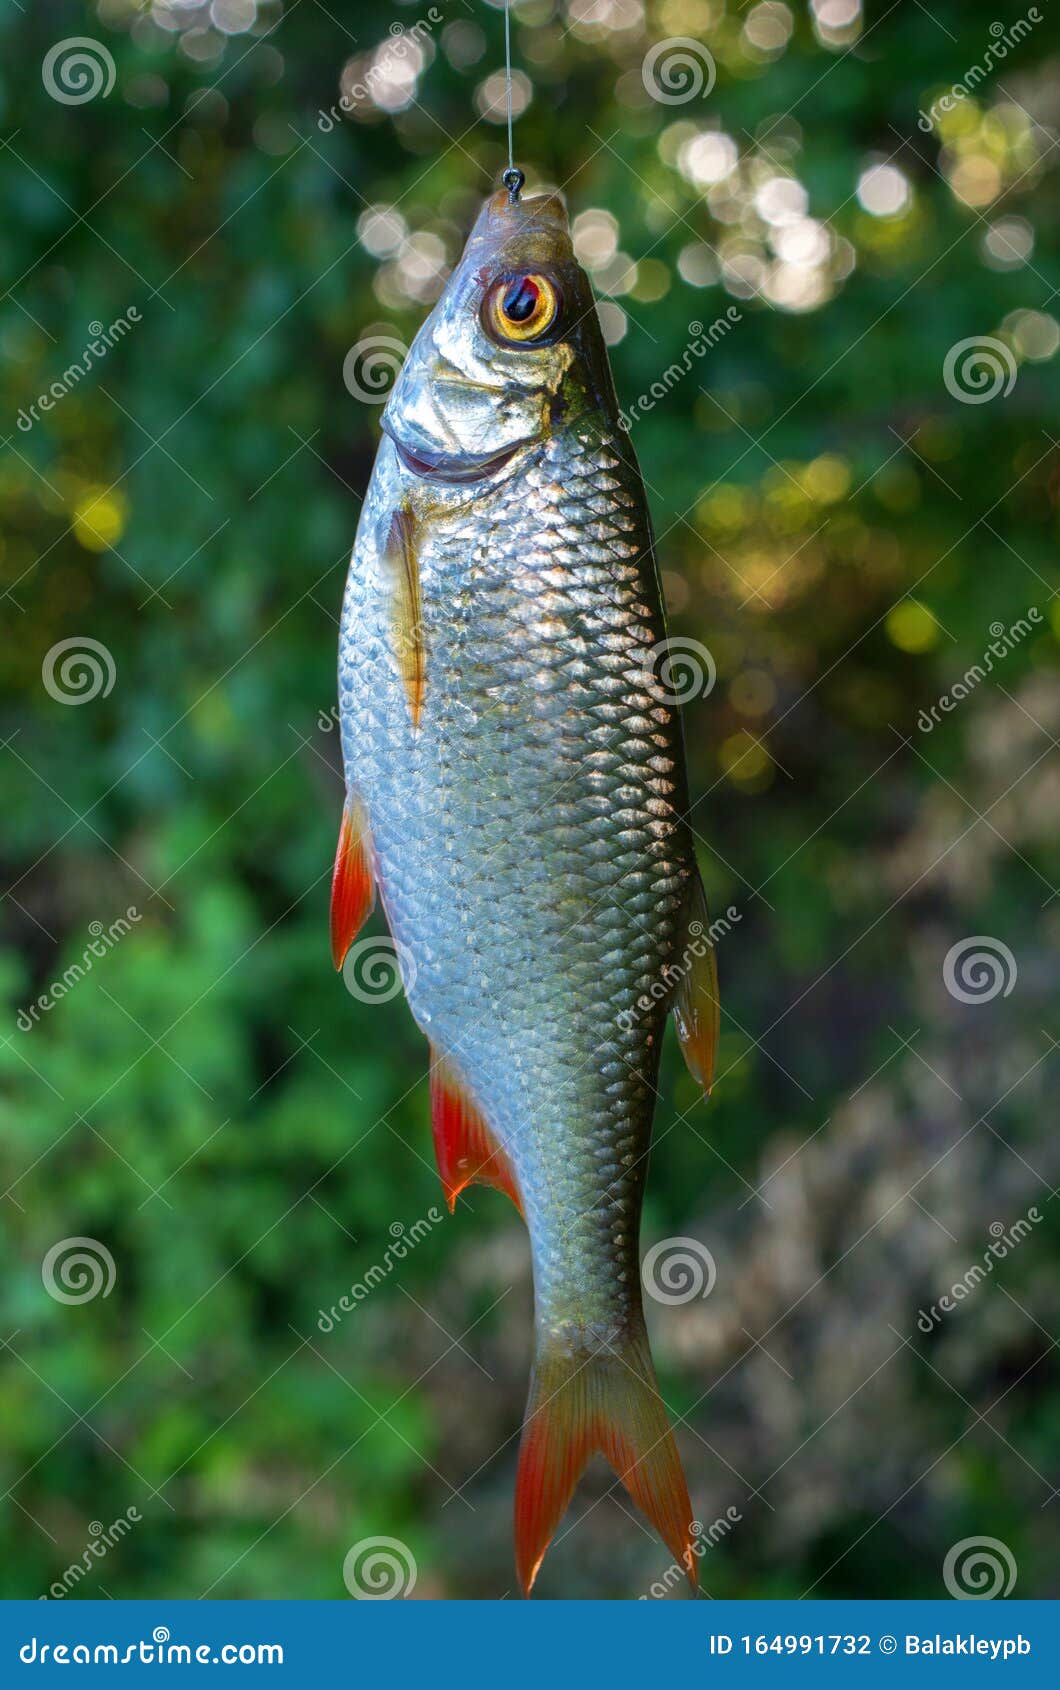 Roach caught fish hanging stock photo. Image of dead - 164991732